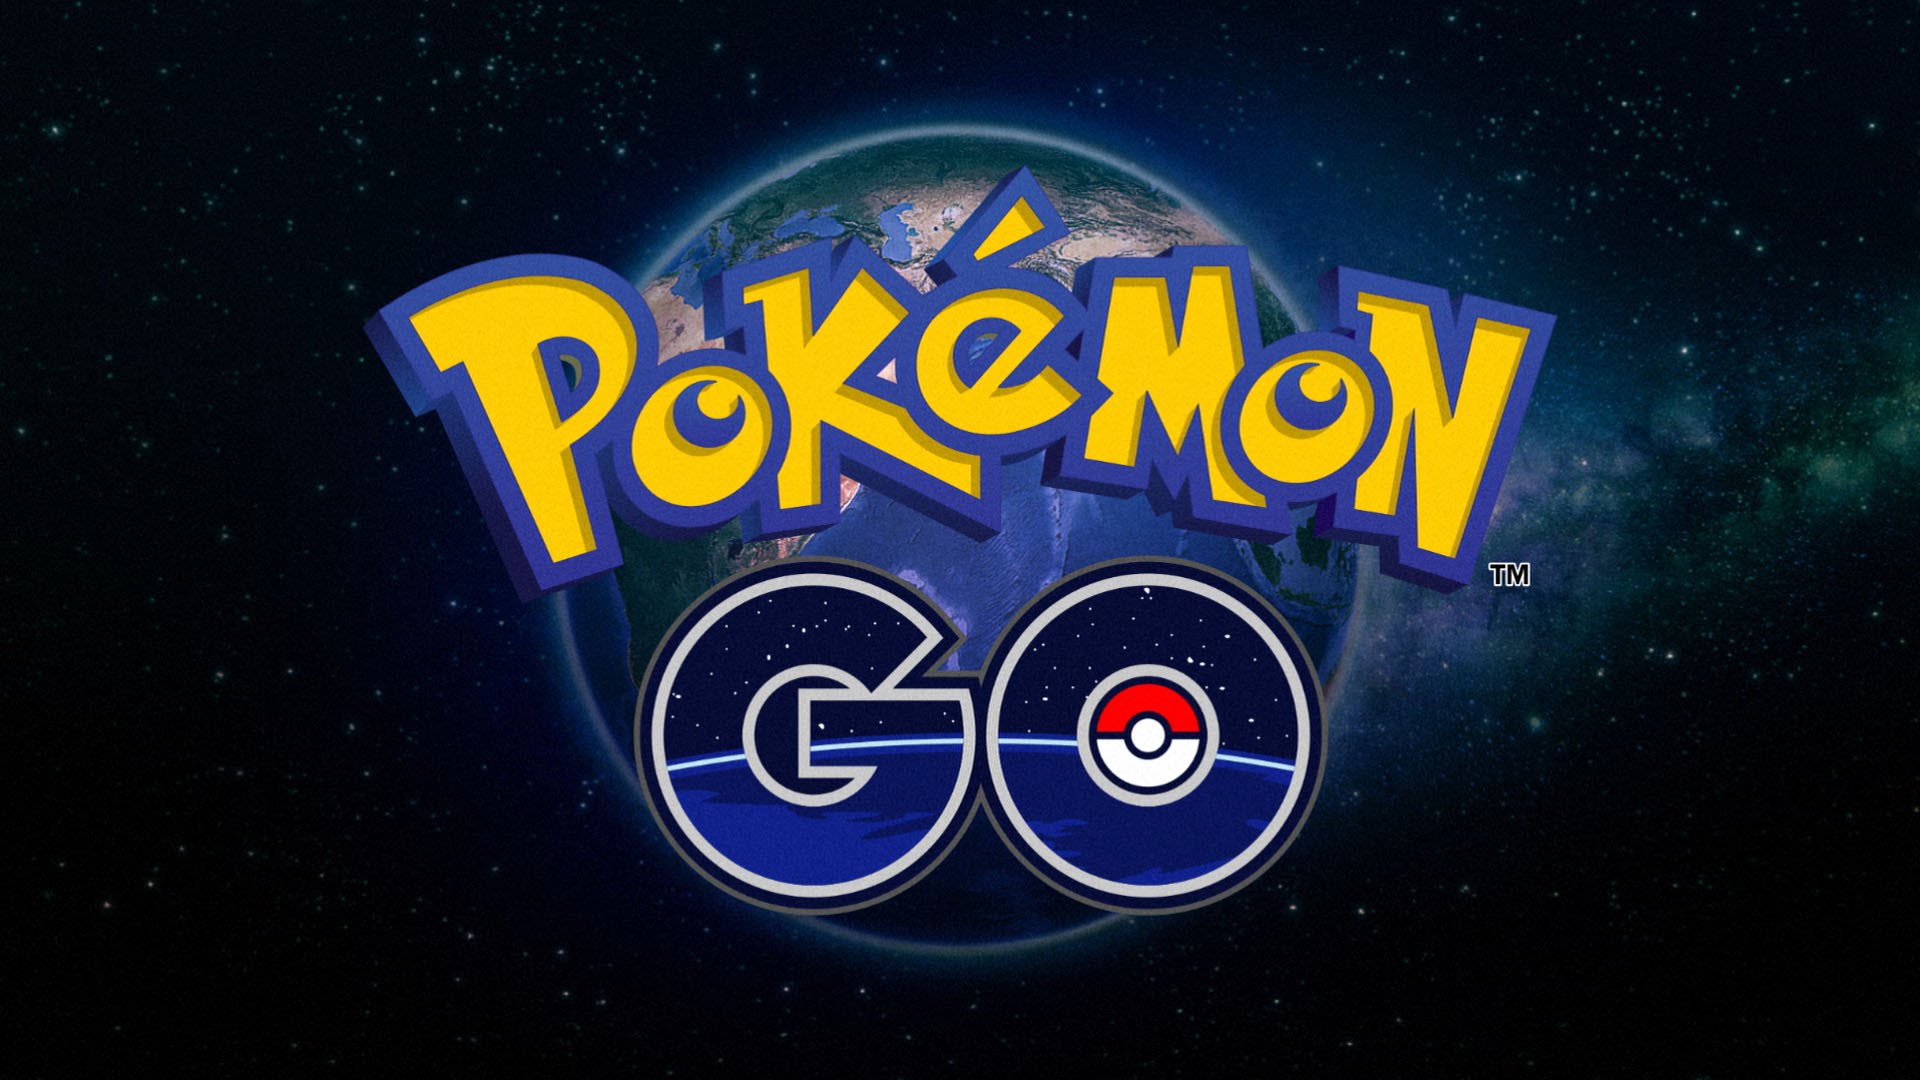 Use Pokémon Go to Make Your Dental Practice More Fun and Get More Traffic